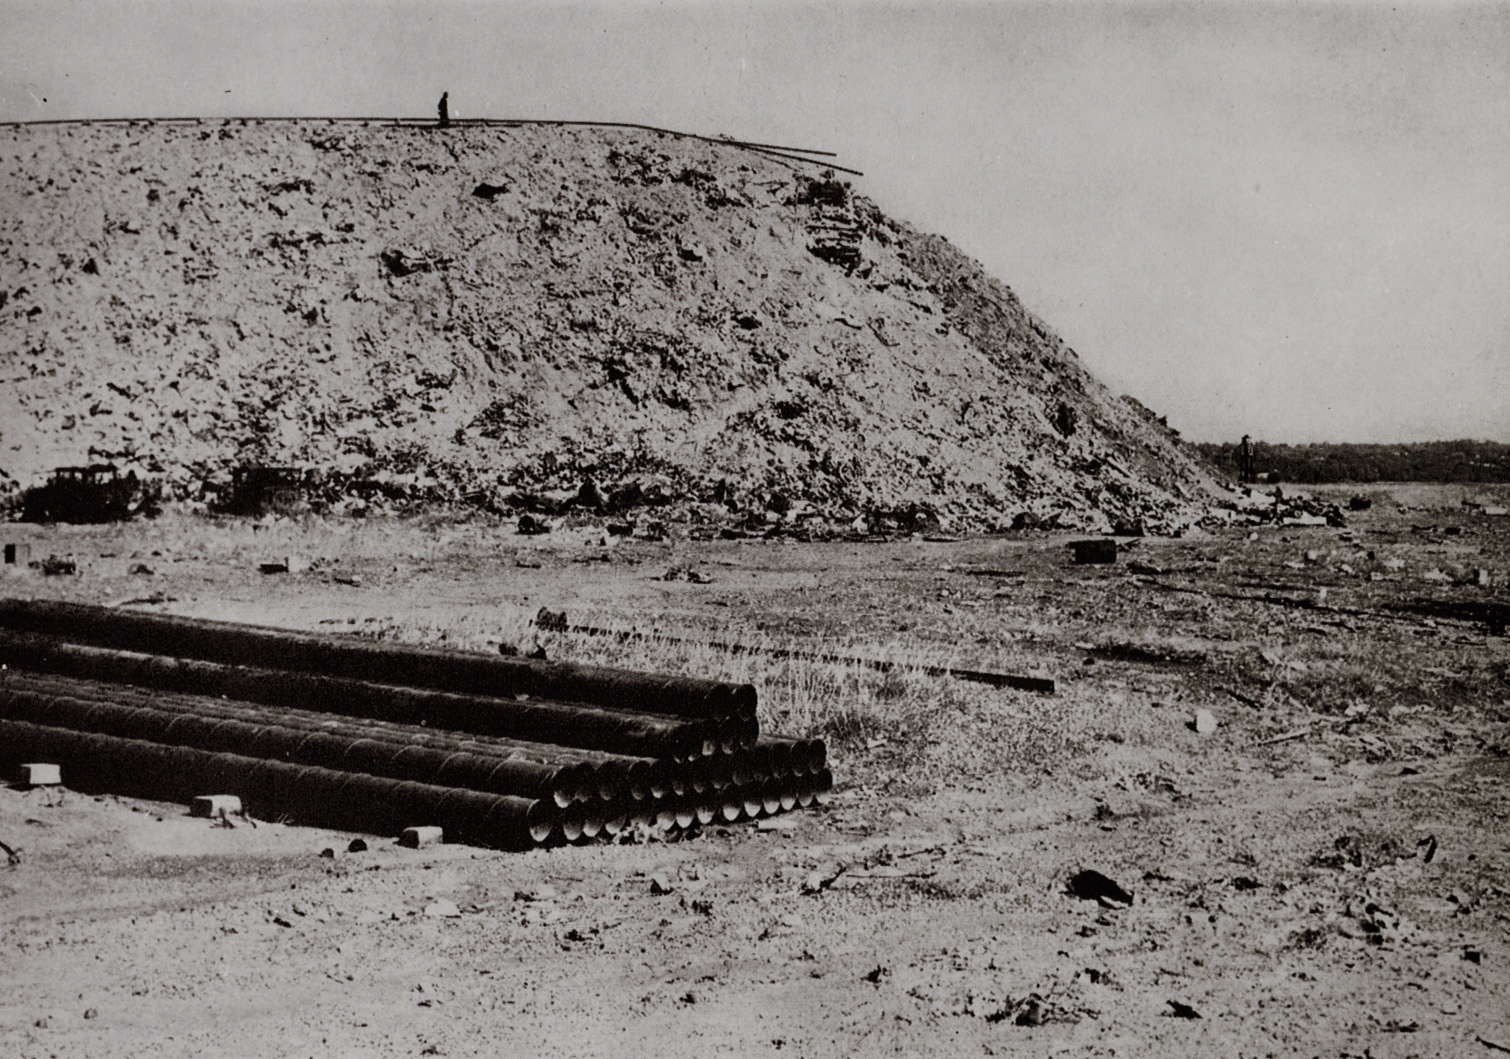 A black and white photo of a meadow, with a 90 feet tall mound of burnt coal ash. At the foot of the mound lies a stack of cylindrical pipes. On top of the mound is a silhouette of an adult.